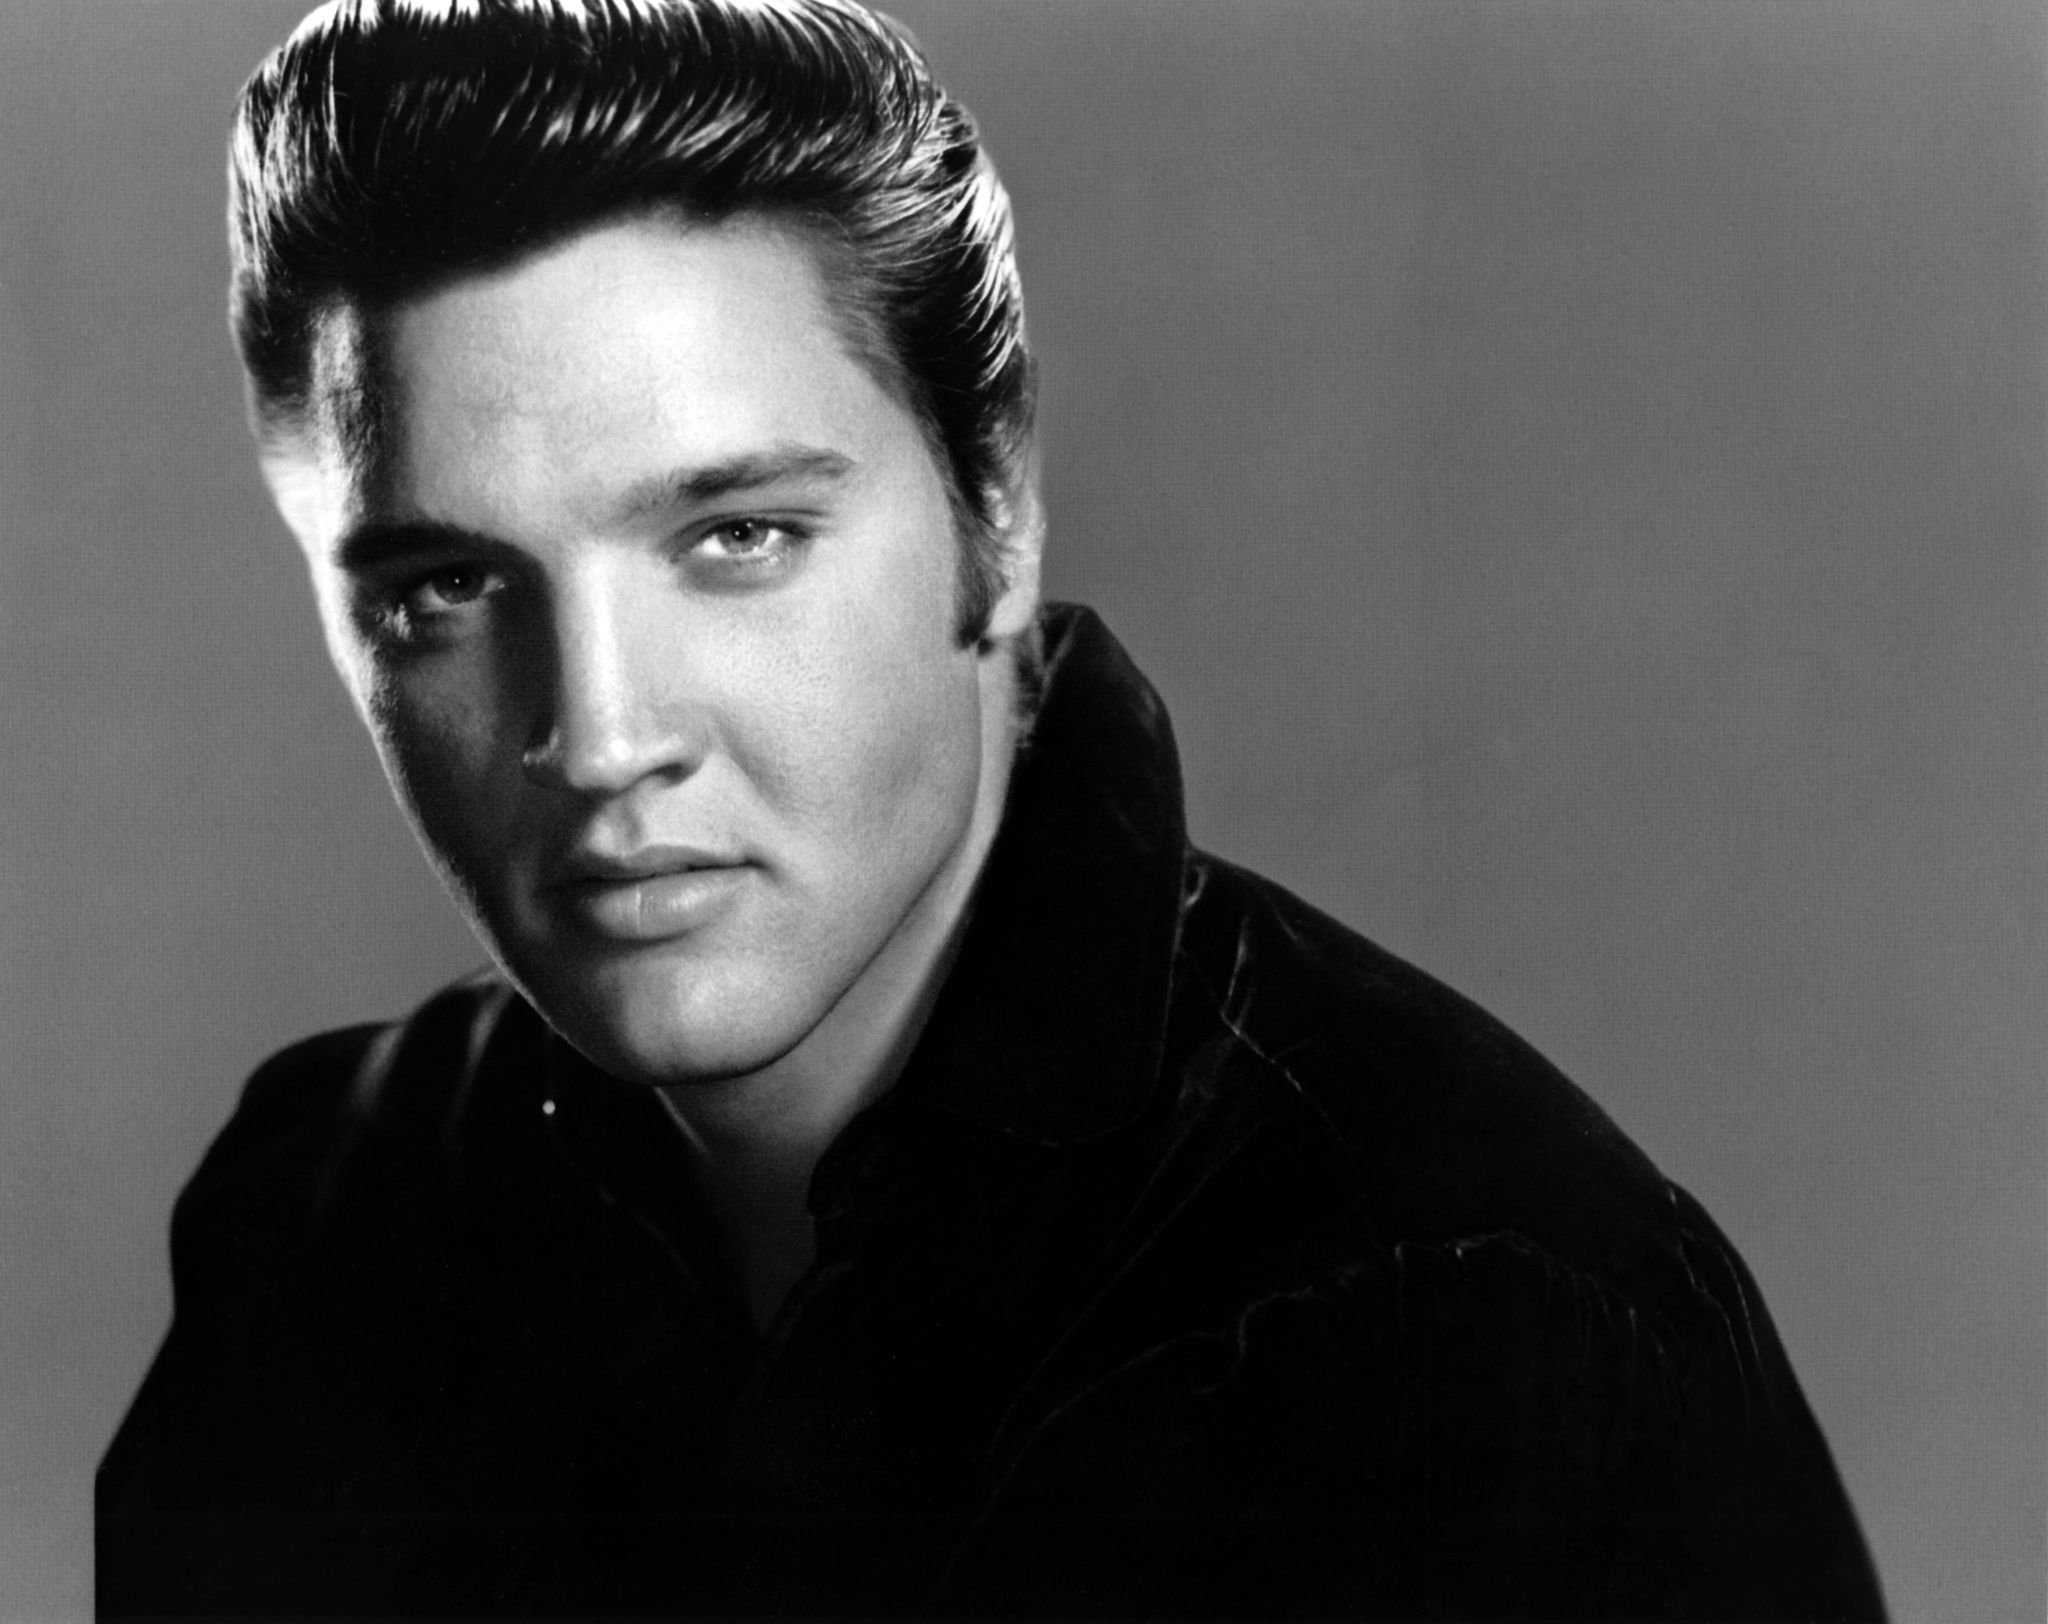 unspecified   january 01  photo of elvis presley posed studio portrait of elvis presley  photo by rbredferns